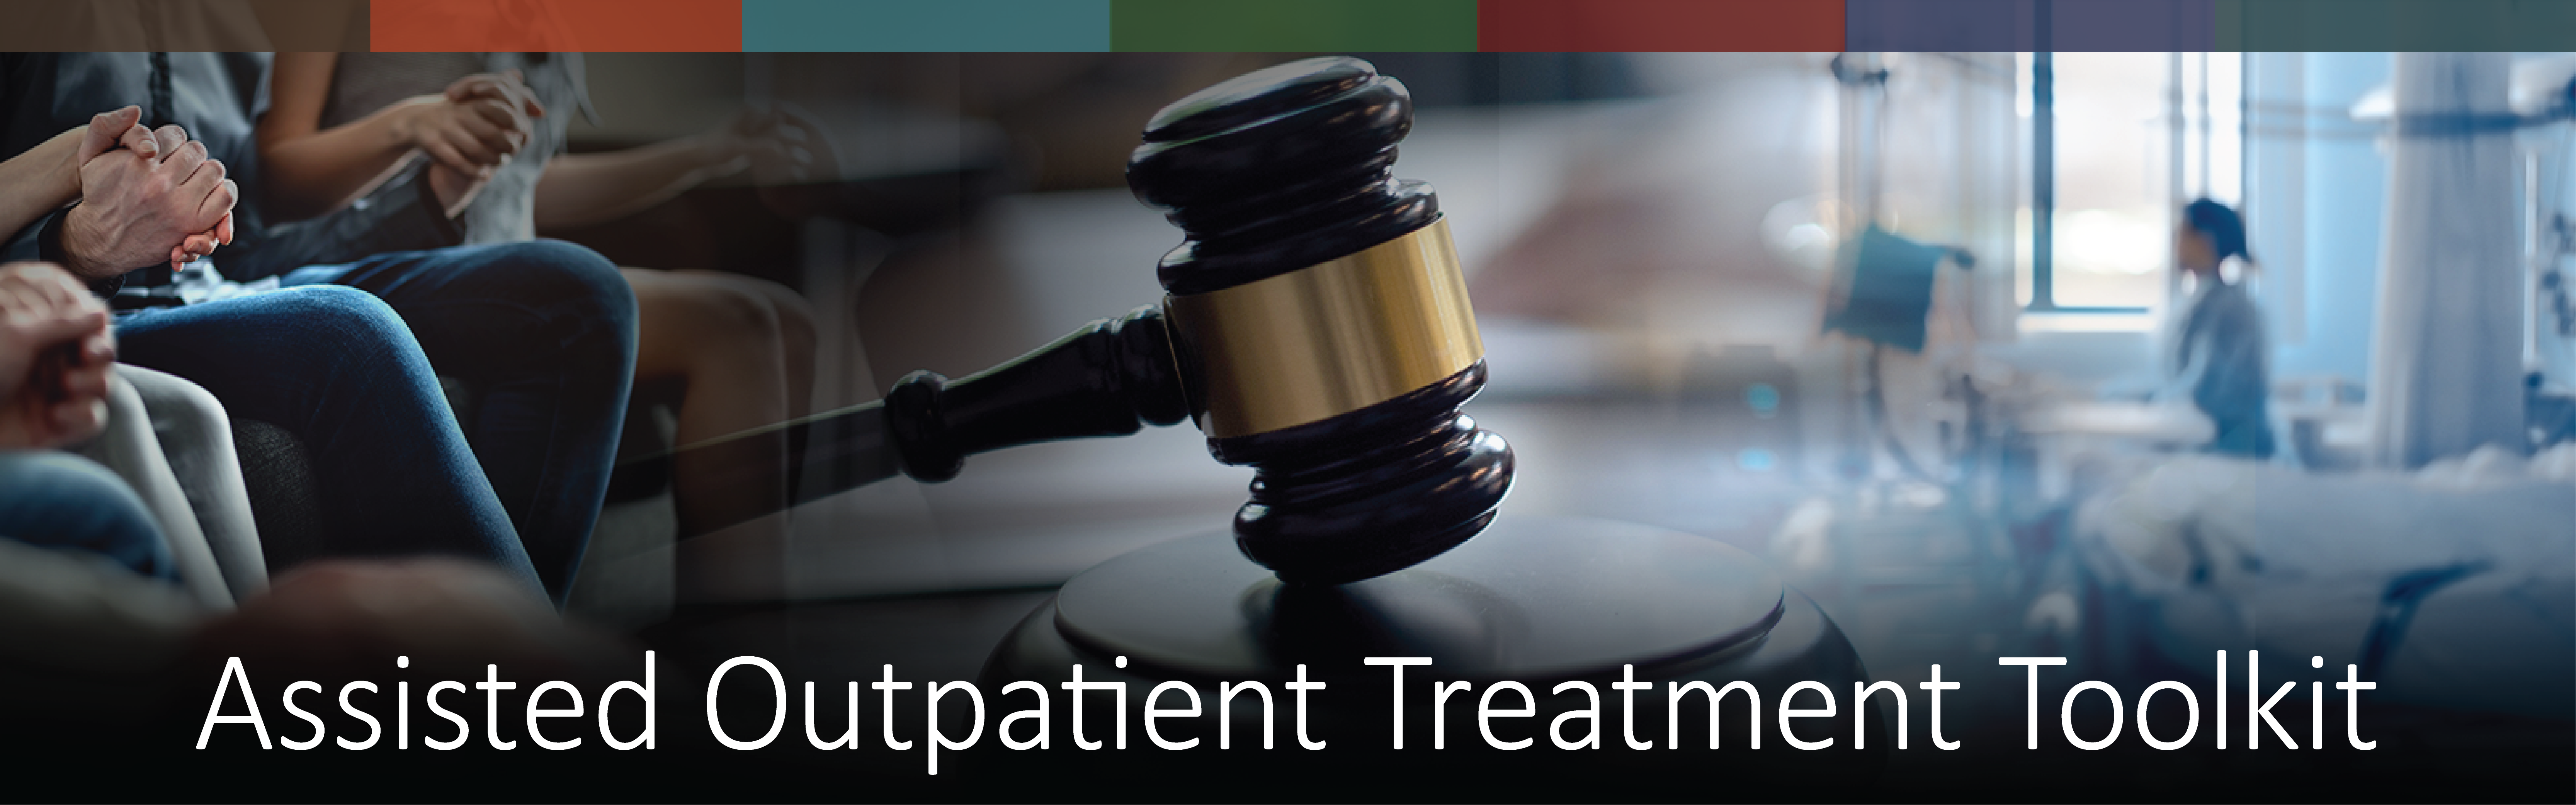 Assisted outpatient treatment toolkit bridges the gap of mental health treatment law and implementation